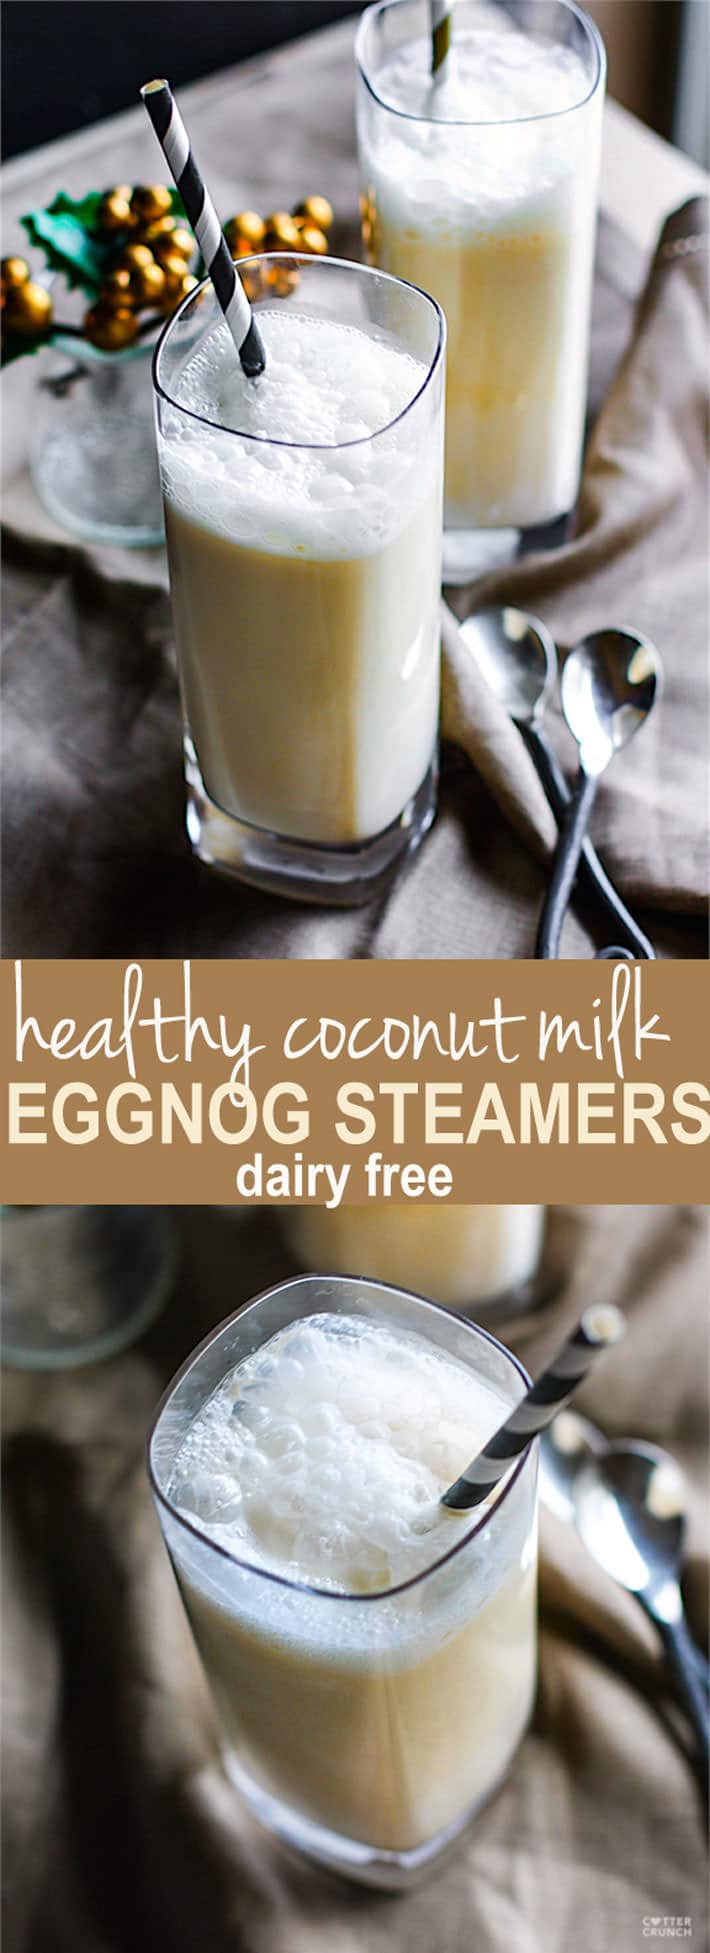 Healthy Coconut Milk Eggnog Steamers! This dairy free eggnog drink is quick to make, single serve or for multiple, full of good healthy fats, adn super delicious! Enjoy during the holidays or anytime!